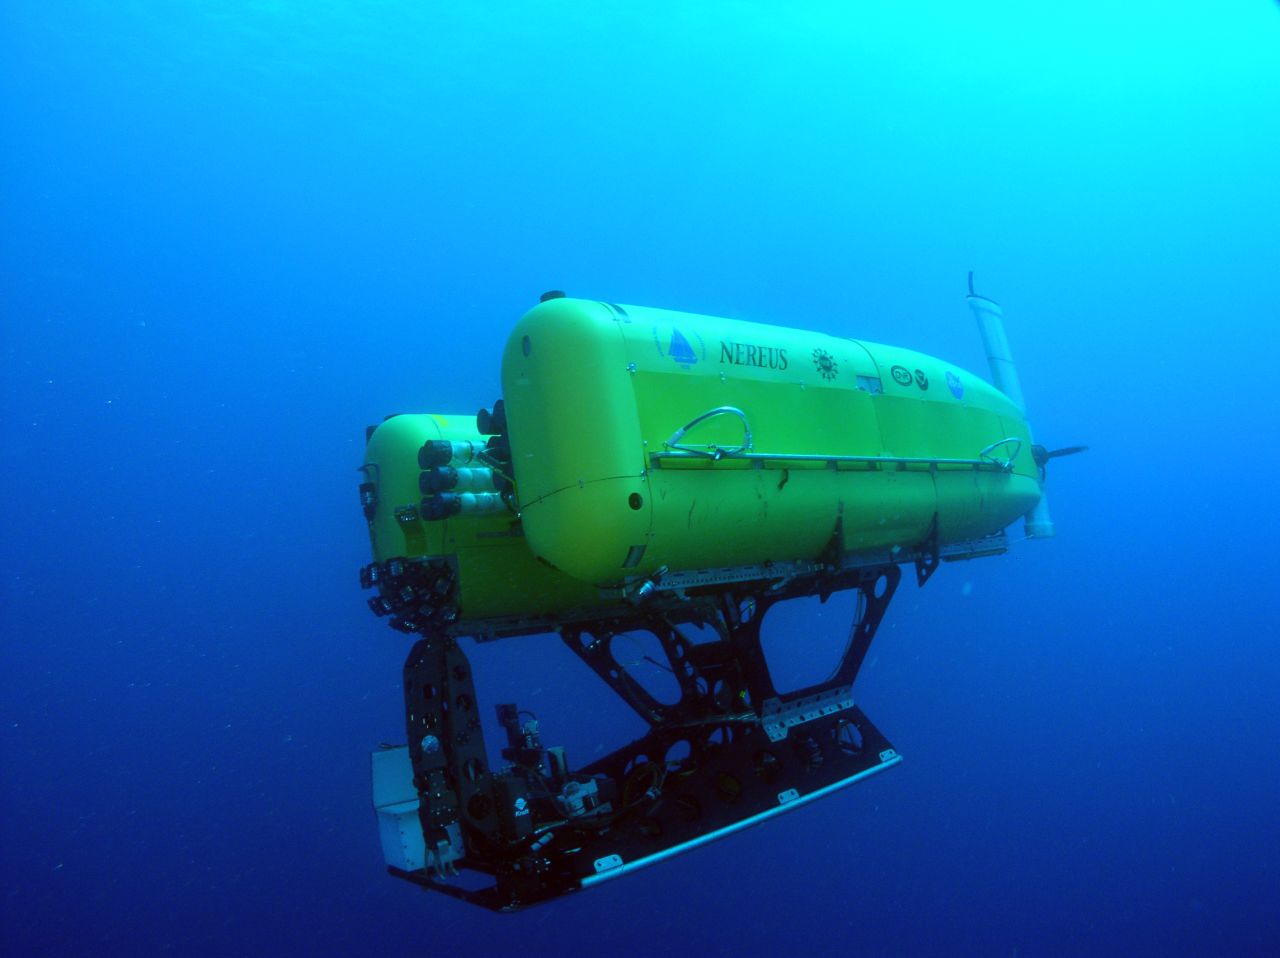 Woods Hole Oceanograhic Institution's Nereus is a one-of-a-kind vehicle that operates as a free-swimming robot to conduct surveys and close-up investigations of seafloor organisms. It reached Challenger Deep in 2009 and in 2014 will be used to conduct the first systematic study of life in ocean trenches.